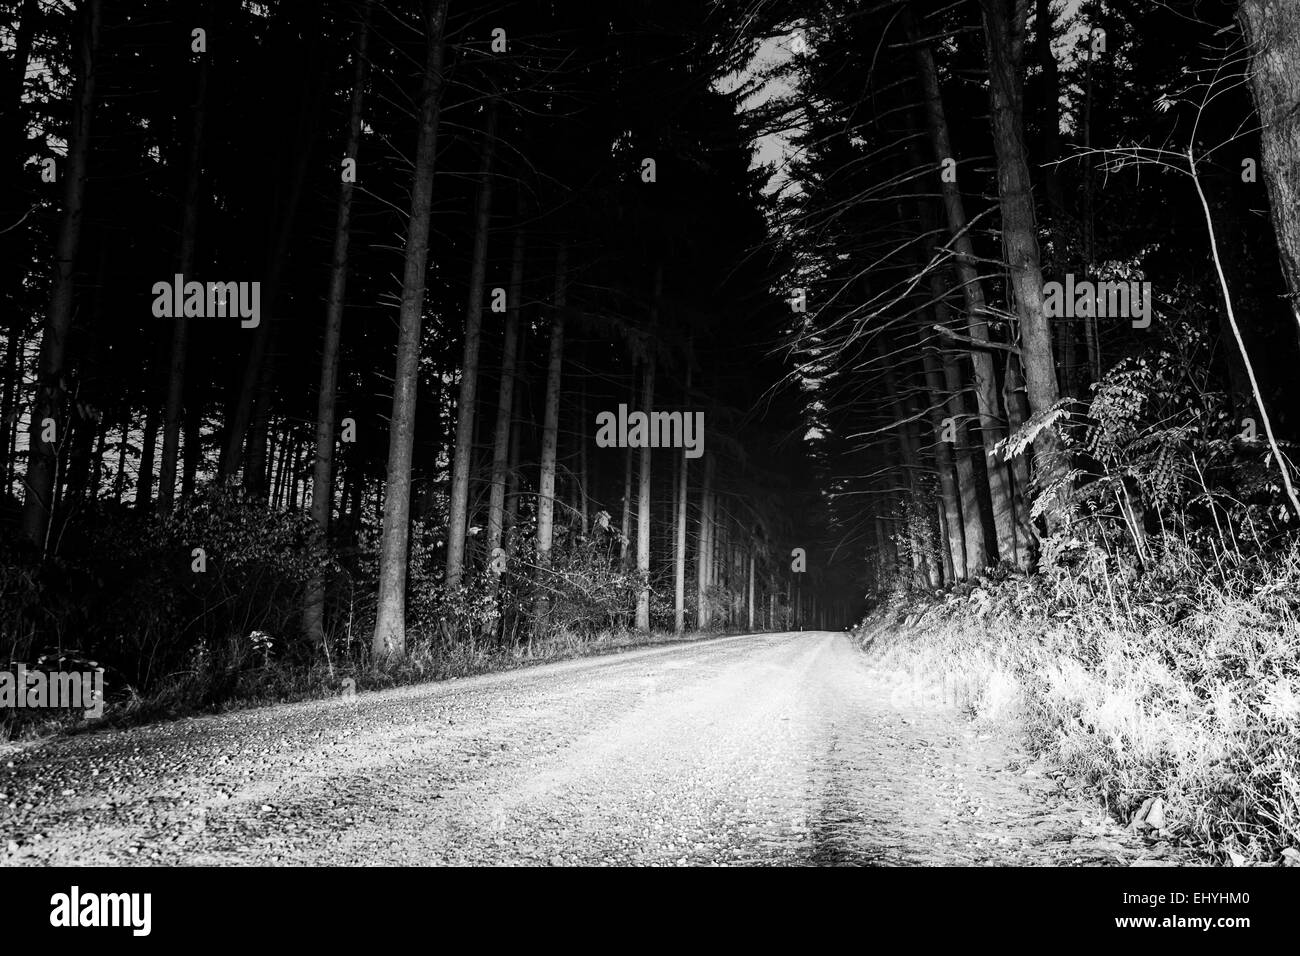 Road through a pine forest Black and White Stock Photos & Images - Alamy